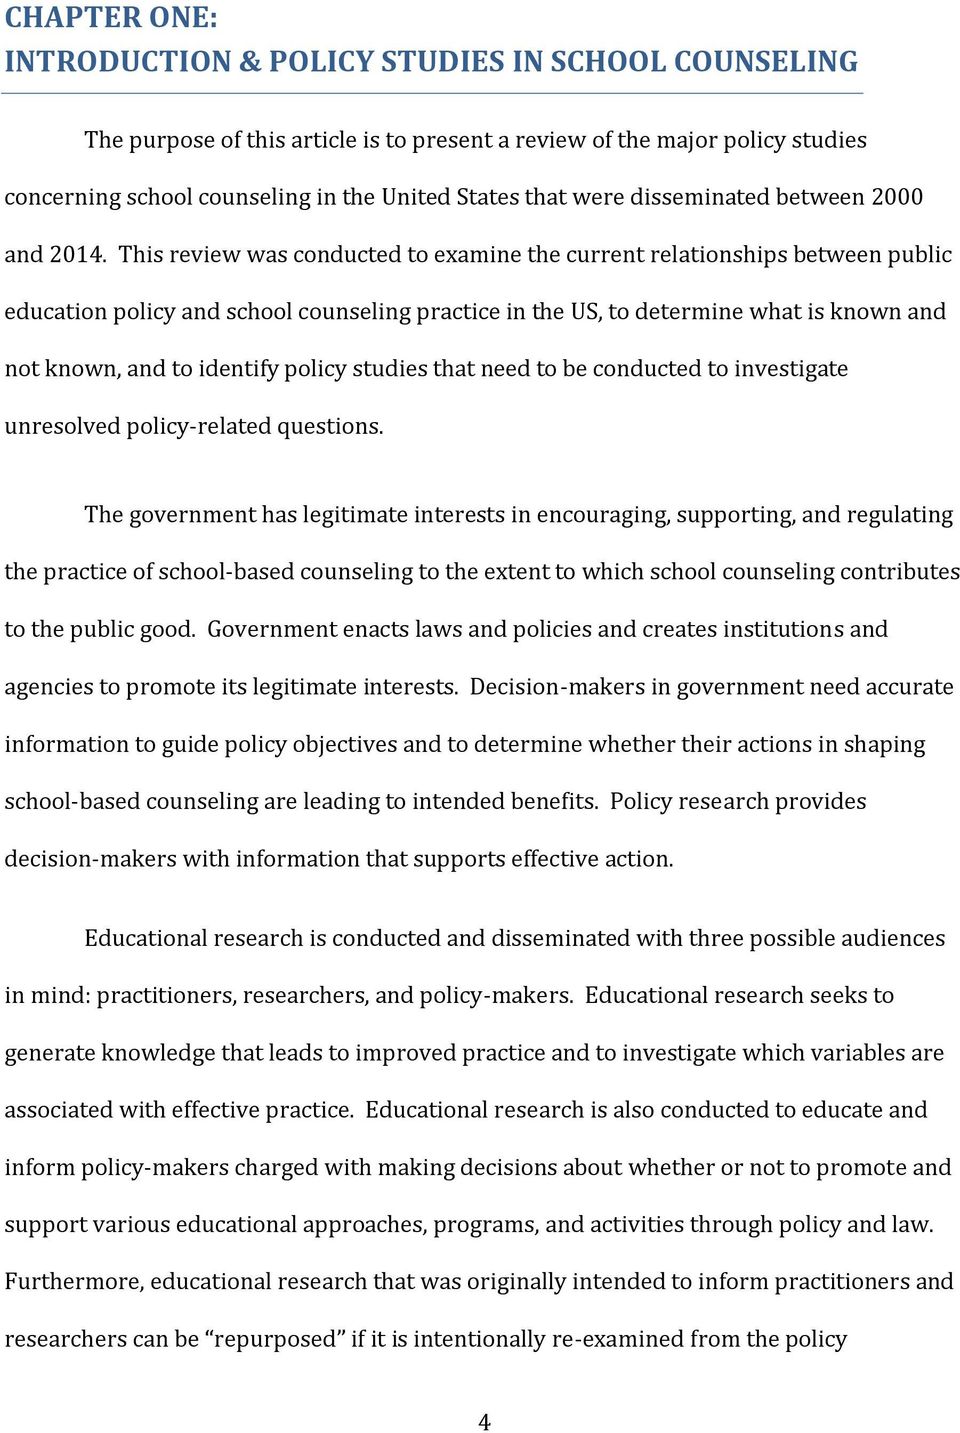 This review was conducted to examine the current relationships between public education policy and school counseling practice in the US, to determine what is known and not known, and to identify